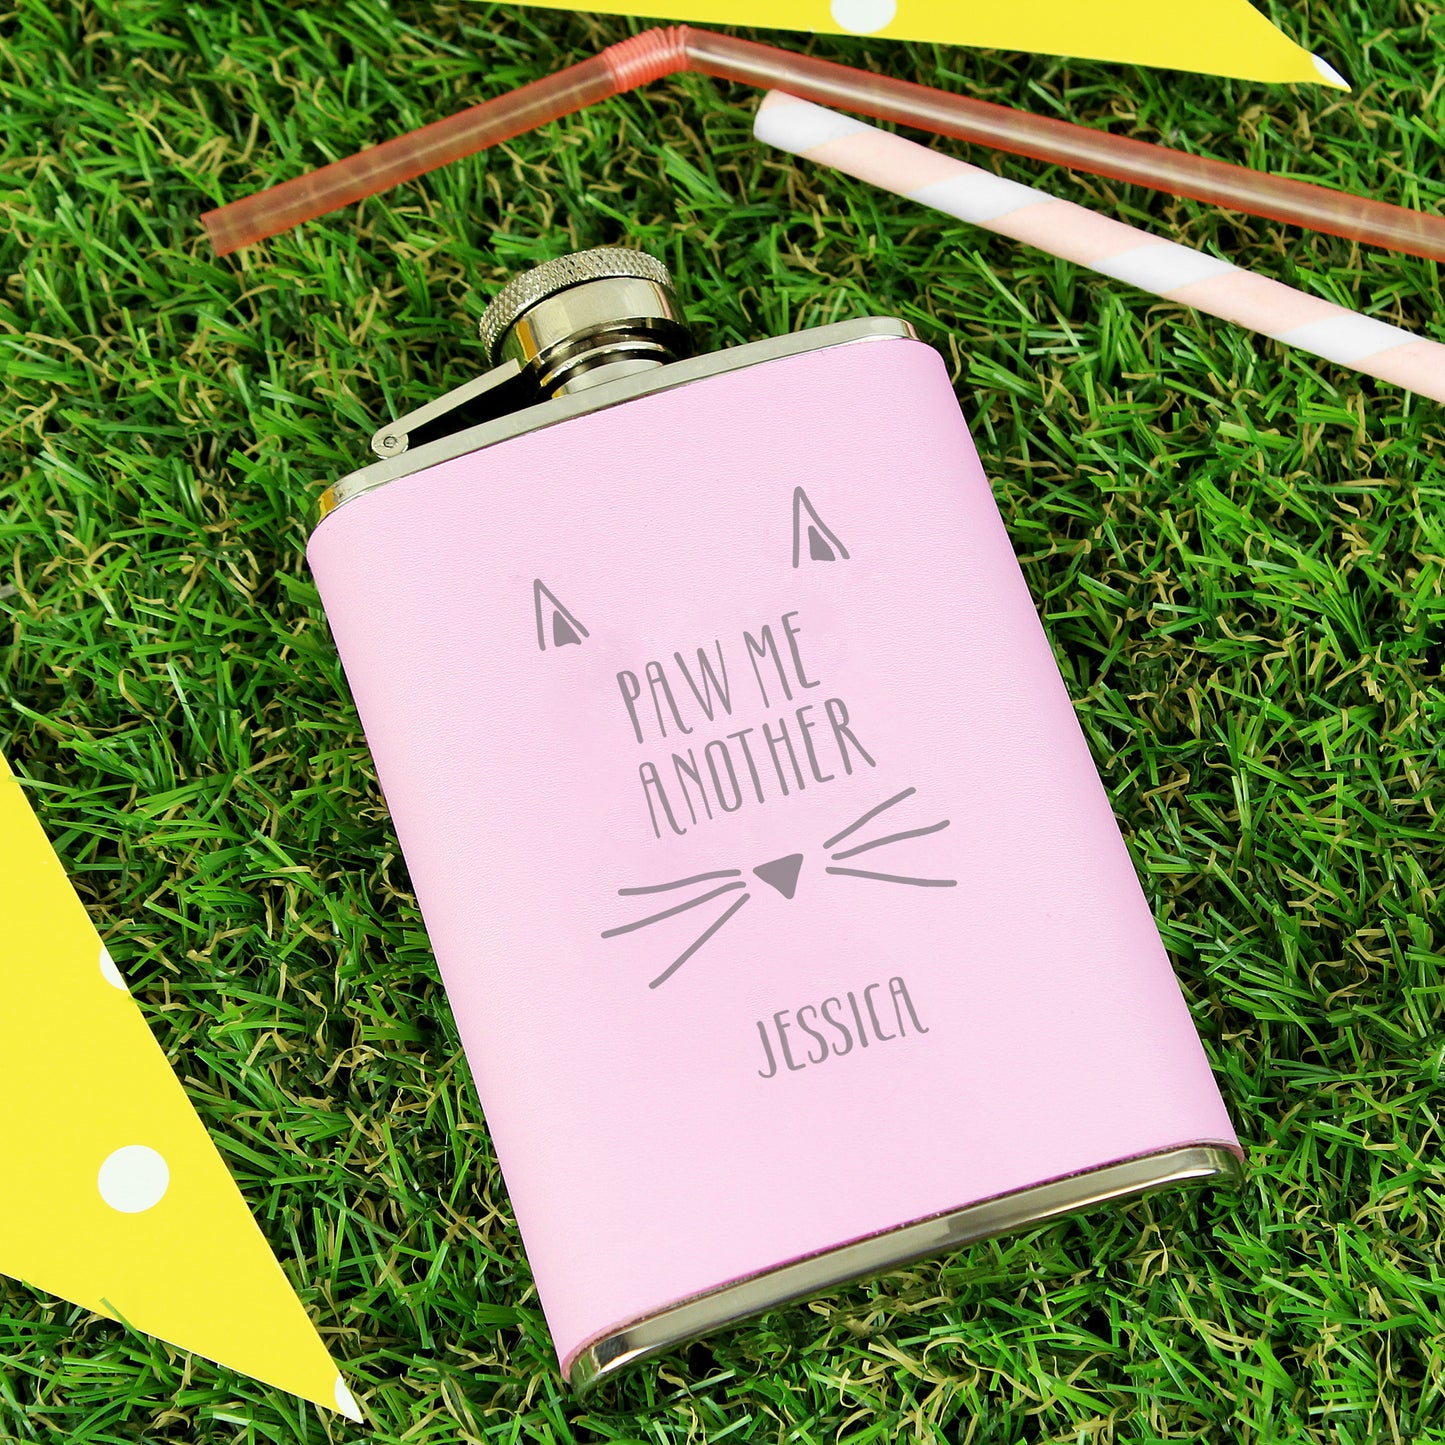 Personalised Paw Me Another Pink Hip Flask - Personalise It!